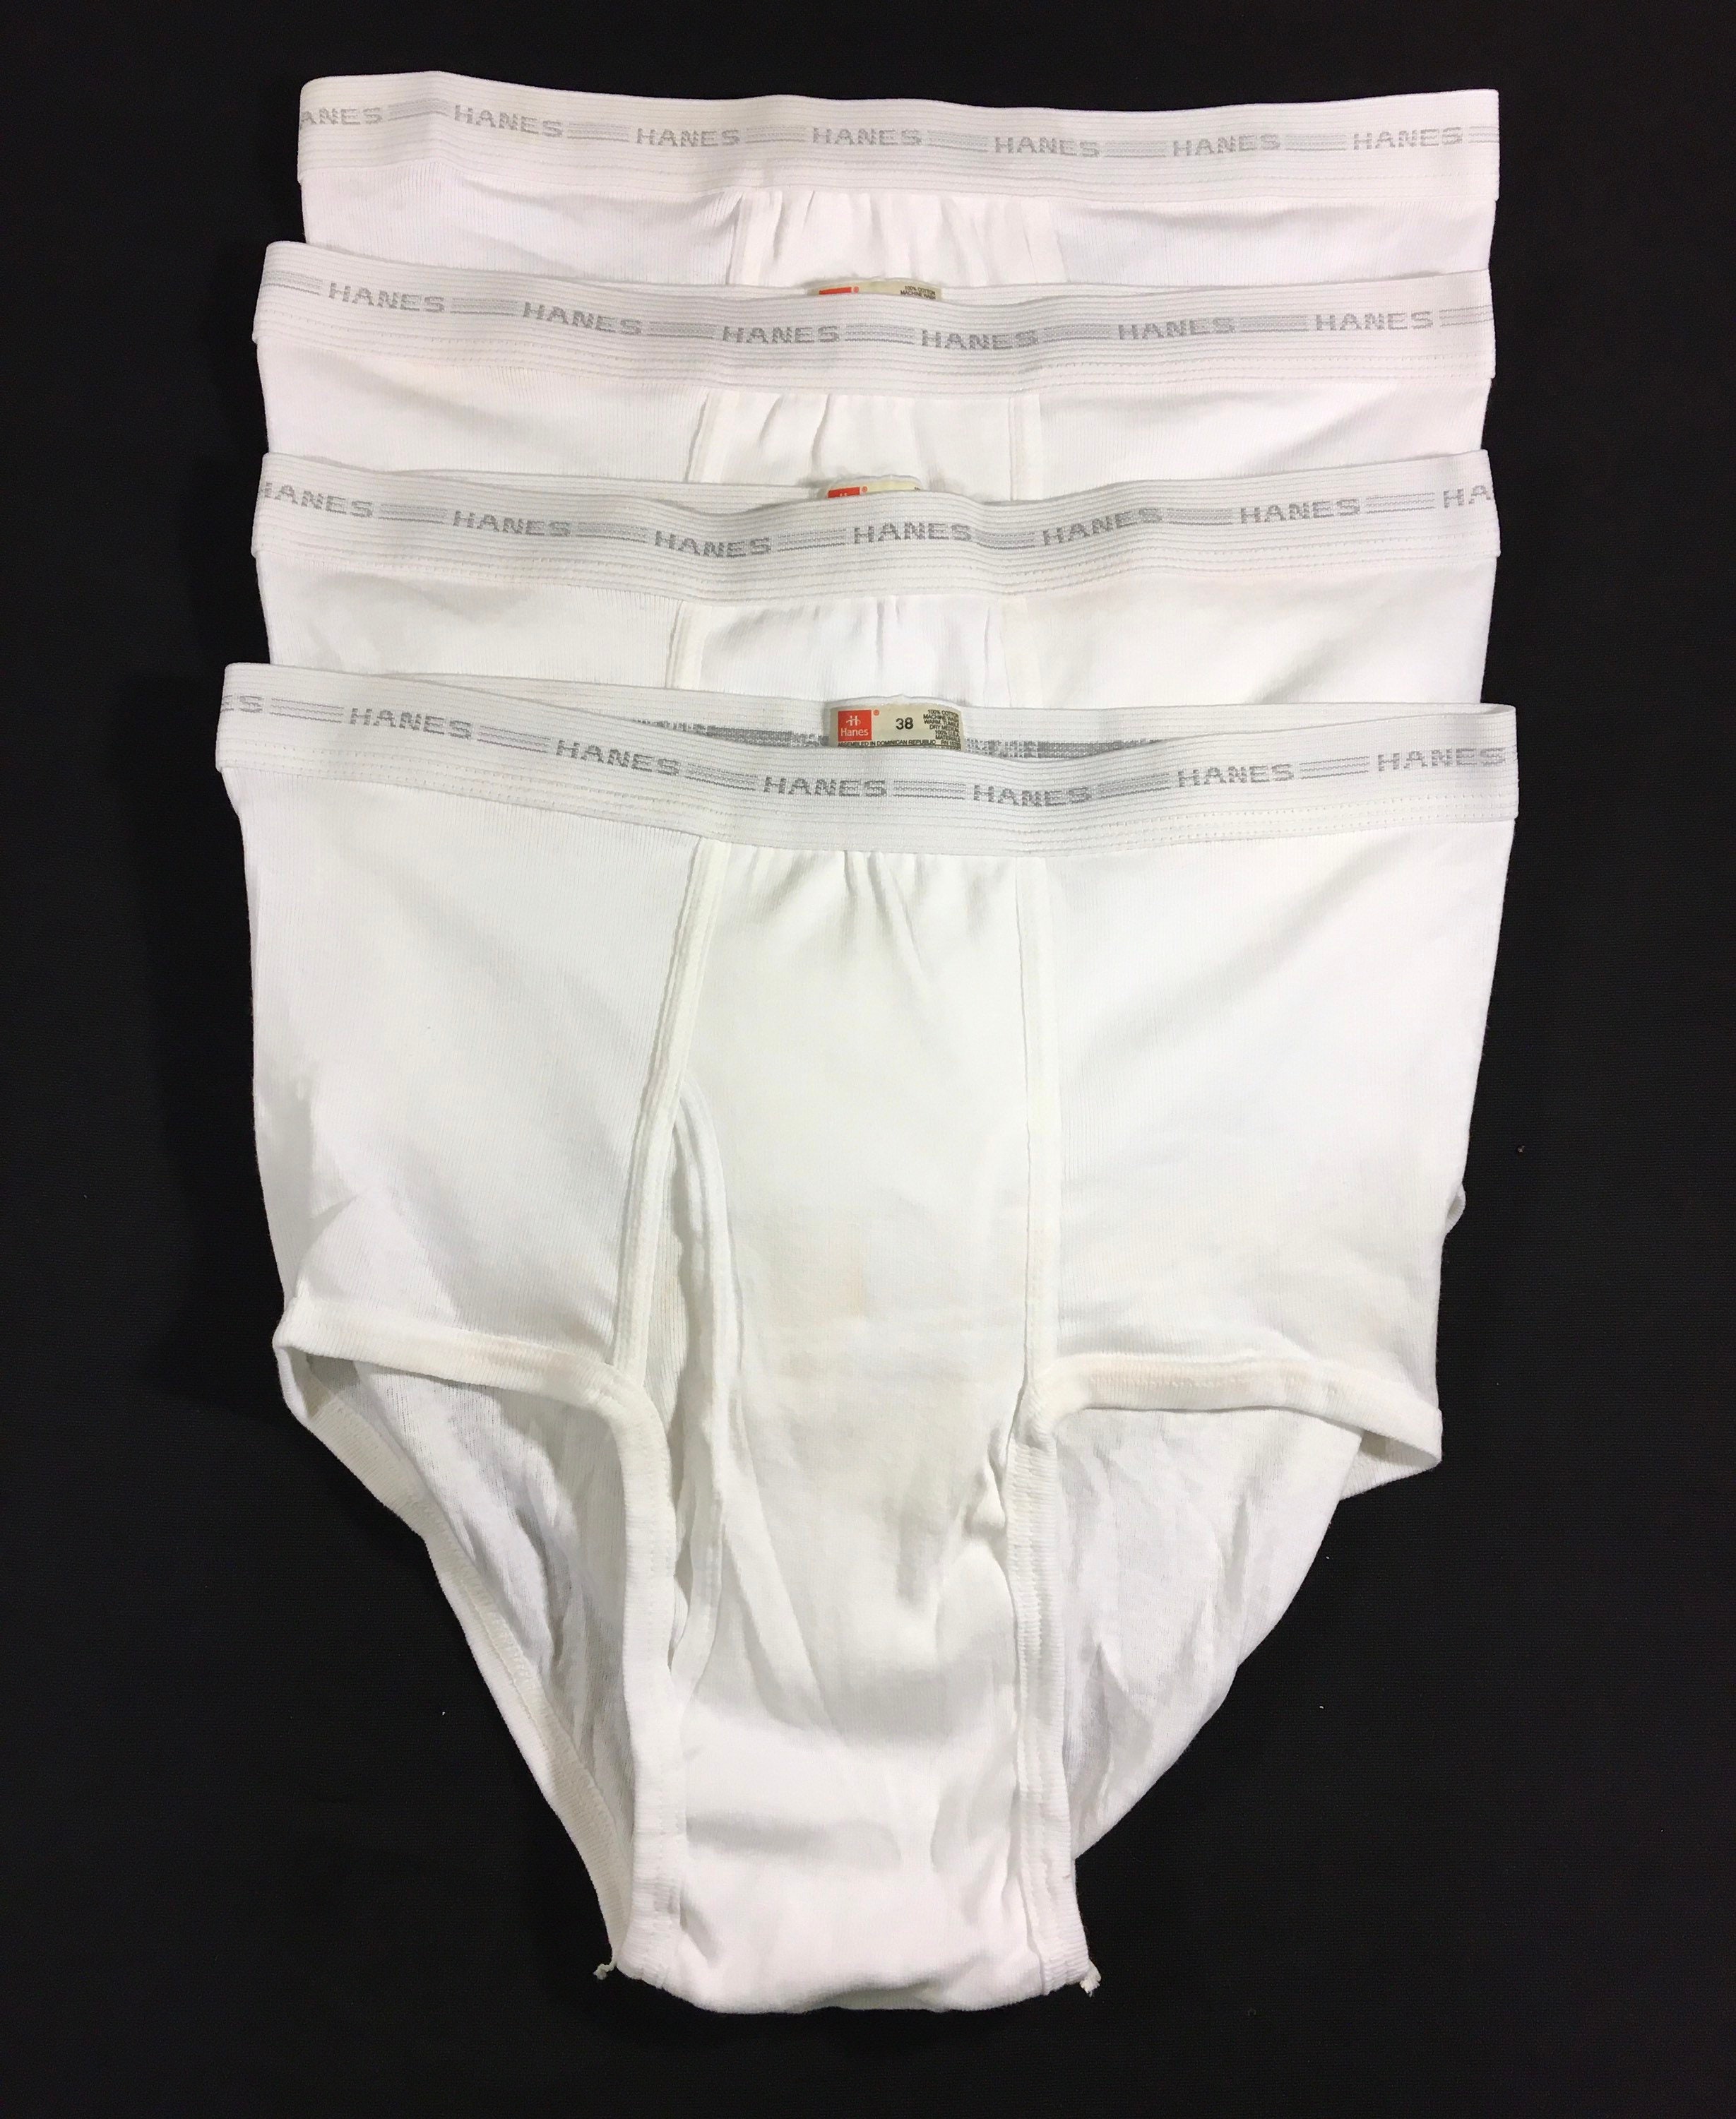 Vintage Hanes Briefs Cotton Underwear Tighty Whities Mens Size 44 Lot Of 4  -  Portugal